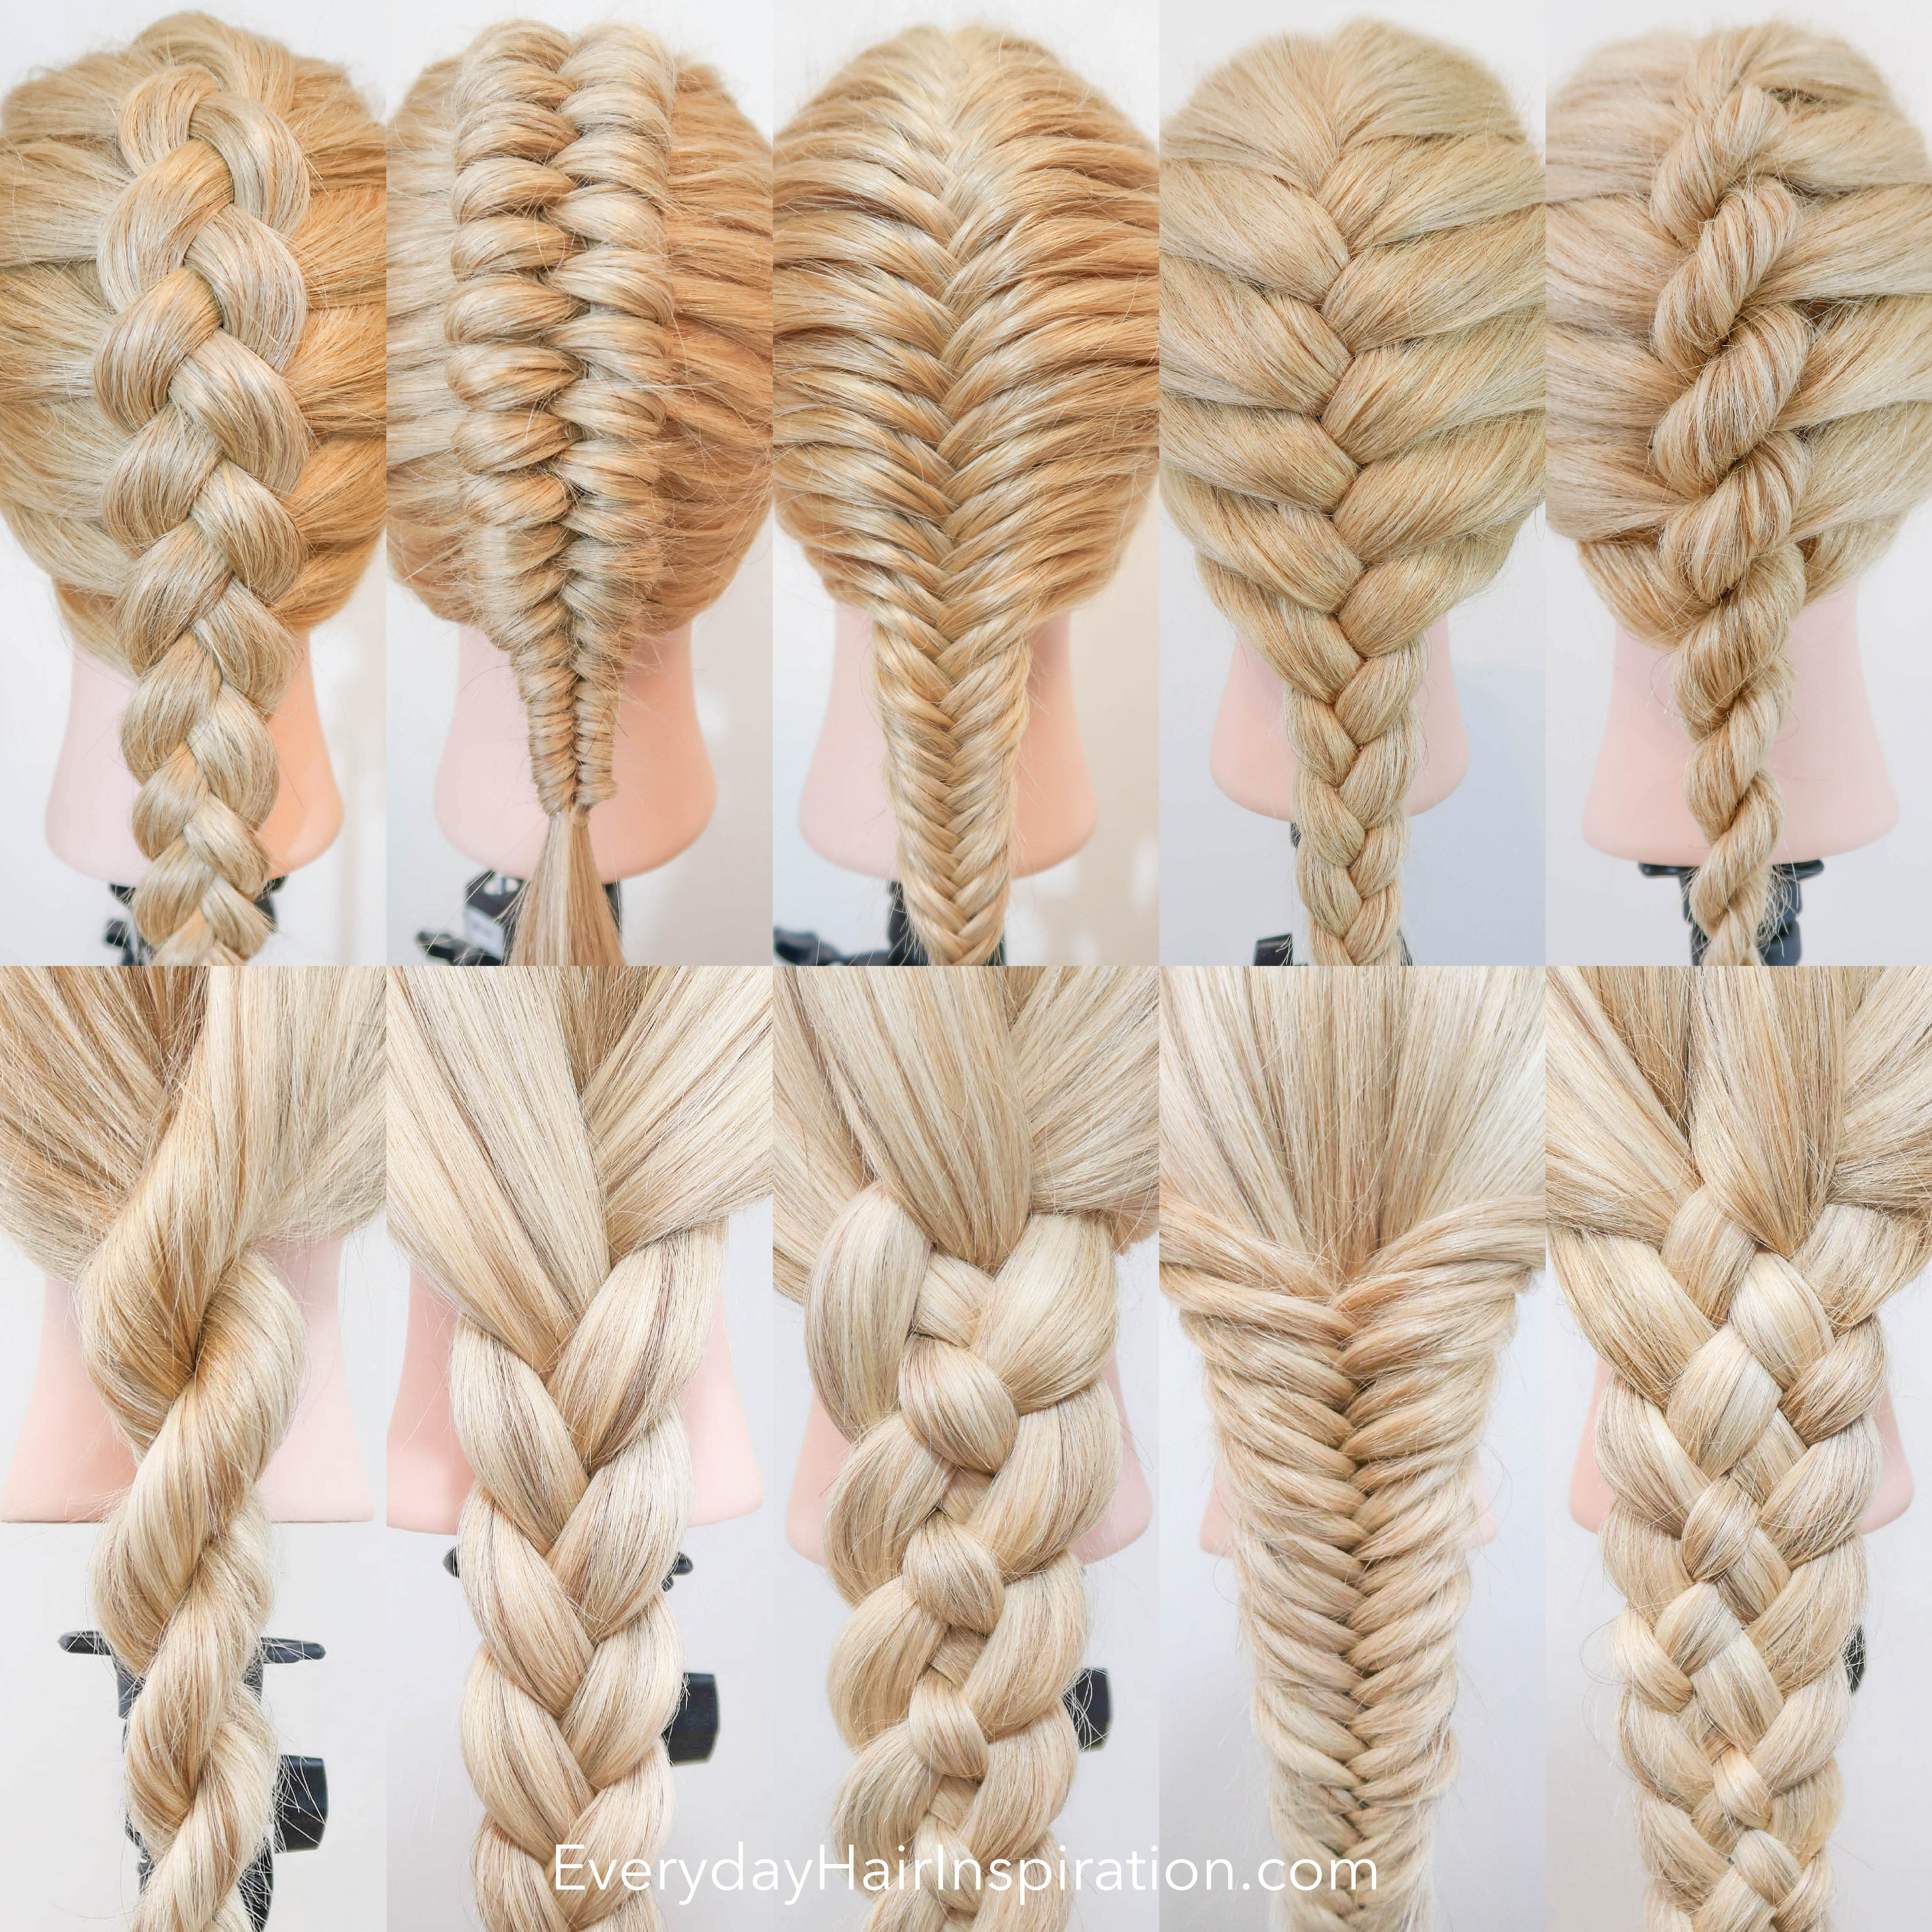 10 Advanced Braid Hairstyles To Try (Tutorial)